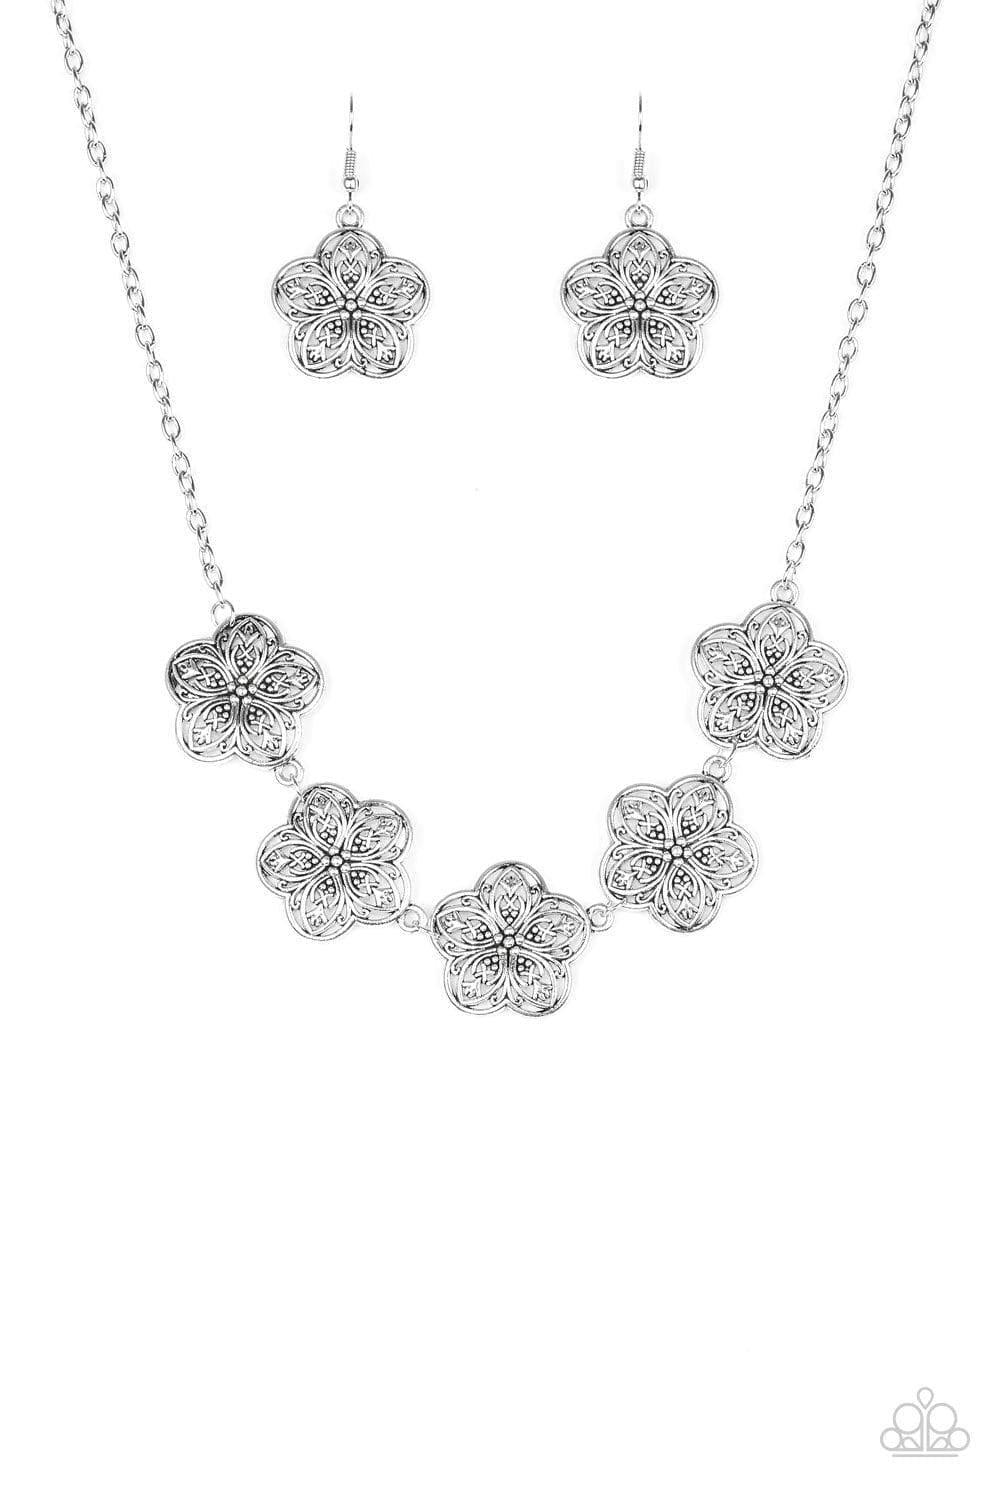 Paparazzi Accessories - Garden Groove - Silver Necklace - Bling by JessieK